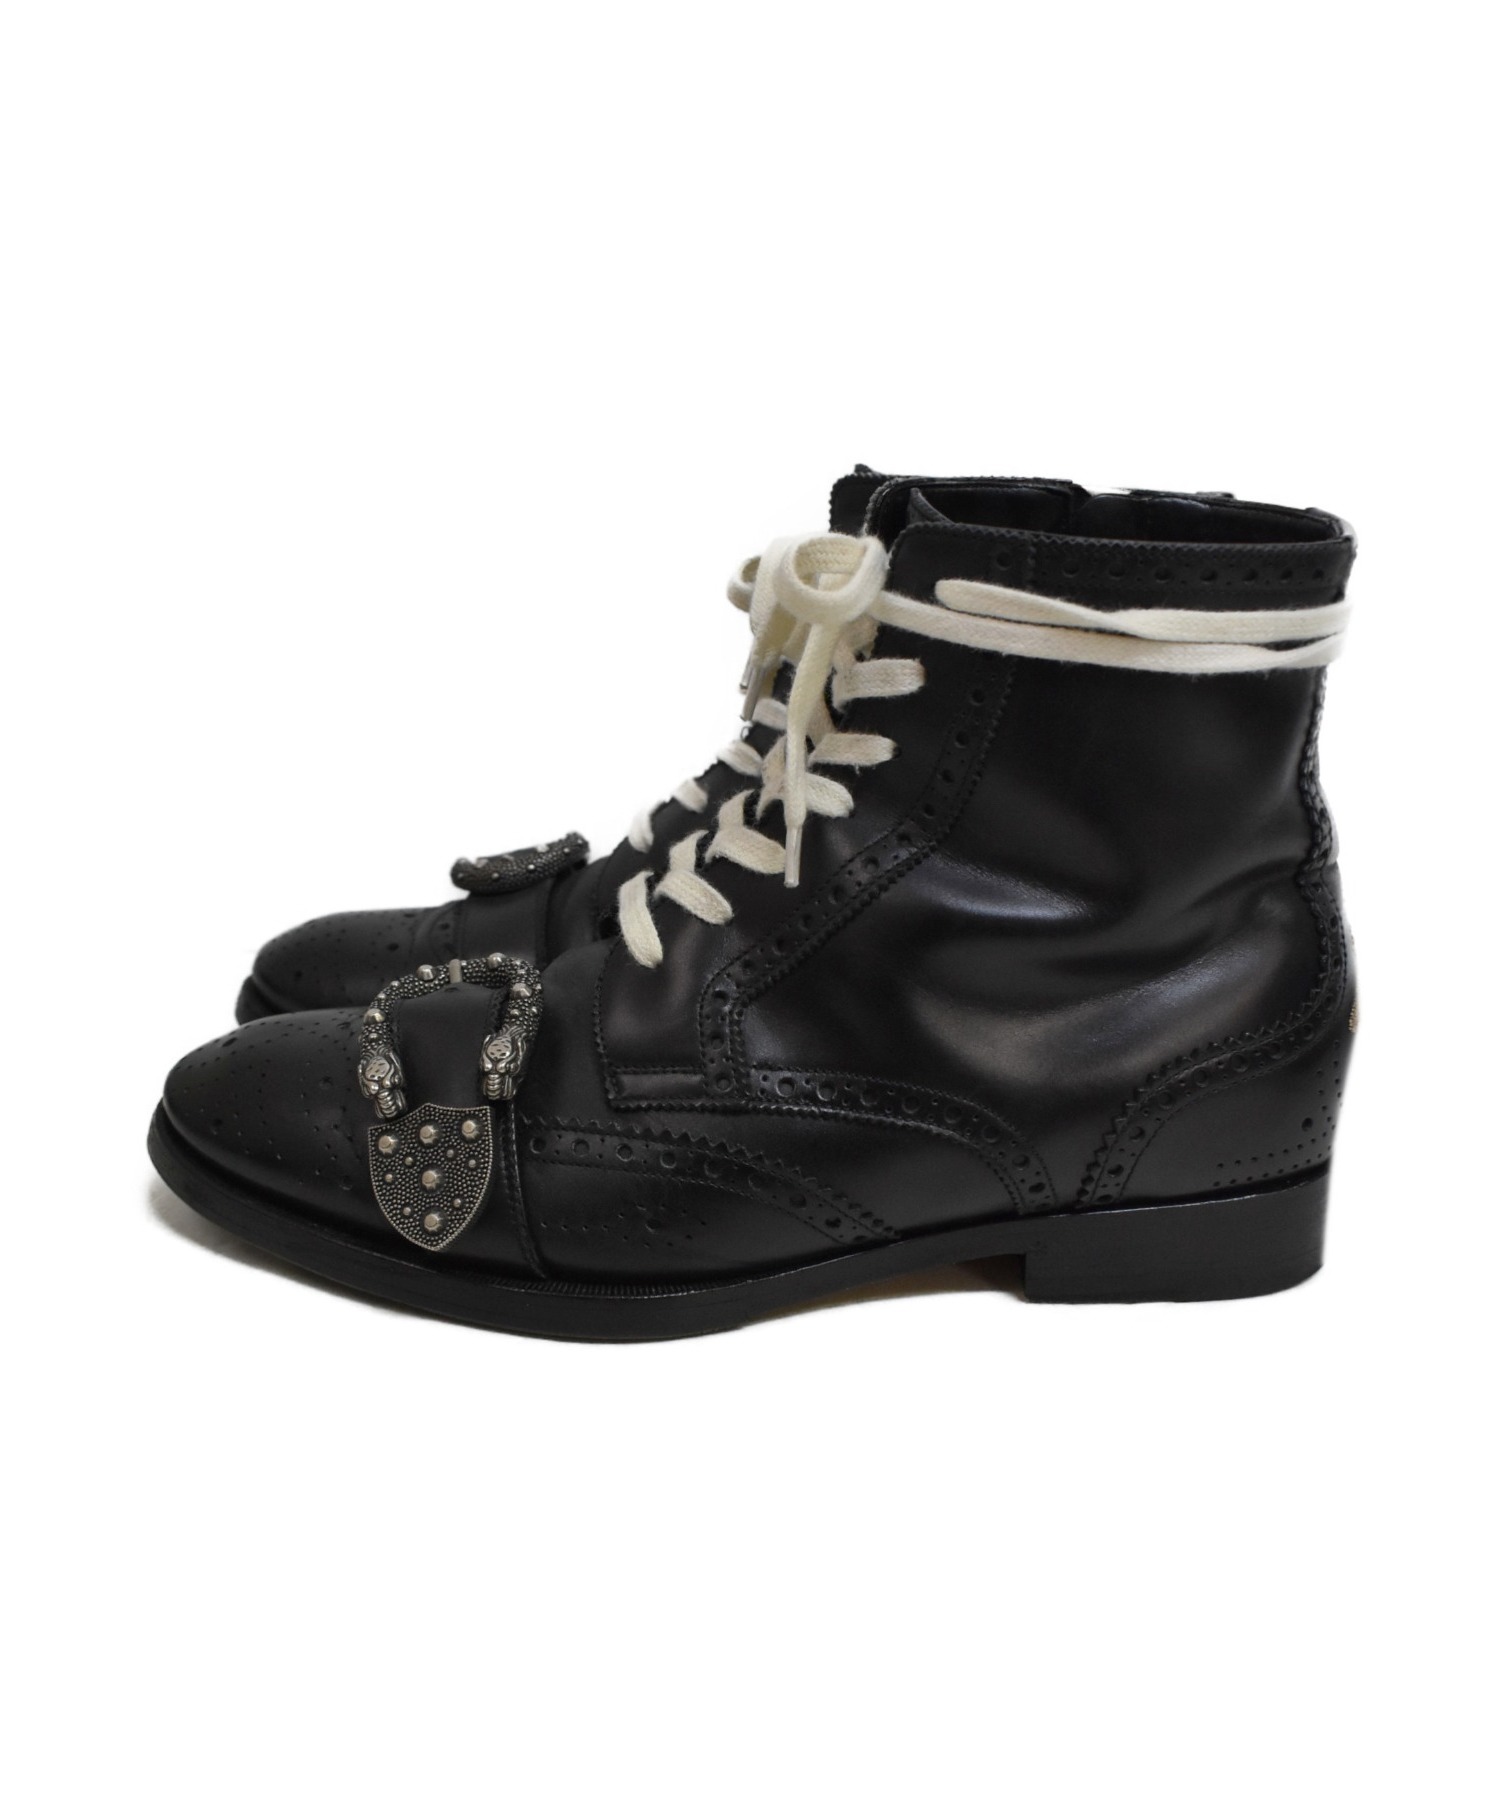 GUCCI (グッチ) 18SS レースアップブローグブーツ ブラック サイズ:7 Queercore Brogue Lace-Up Boot ビー  タイガー